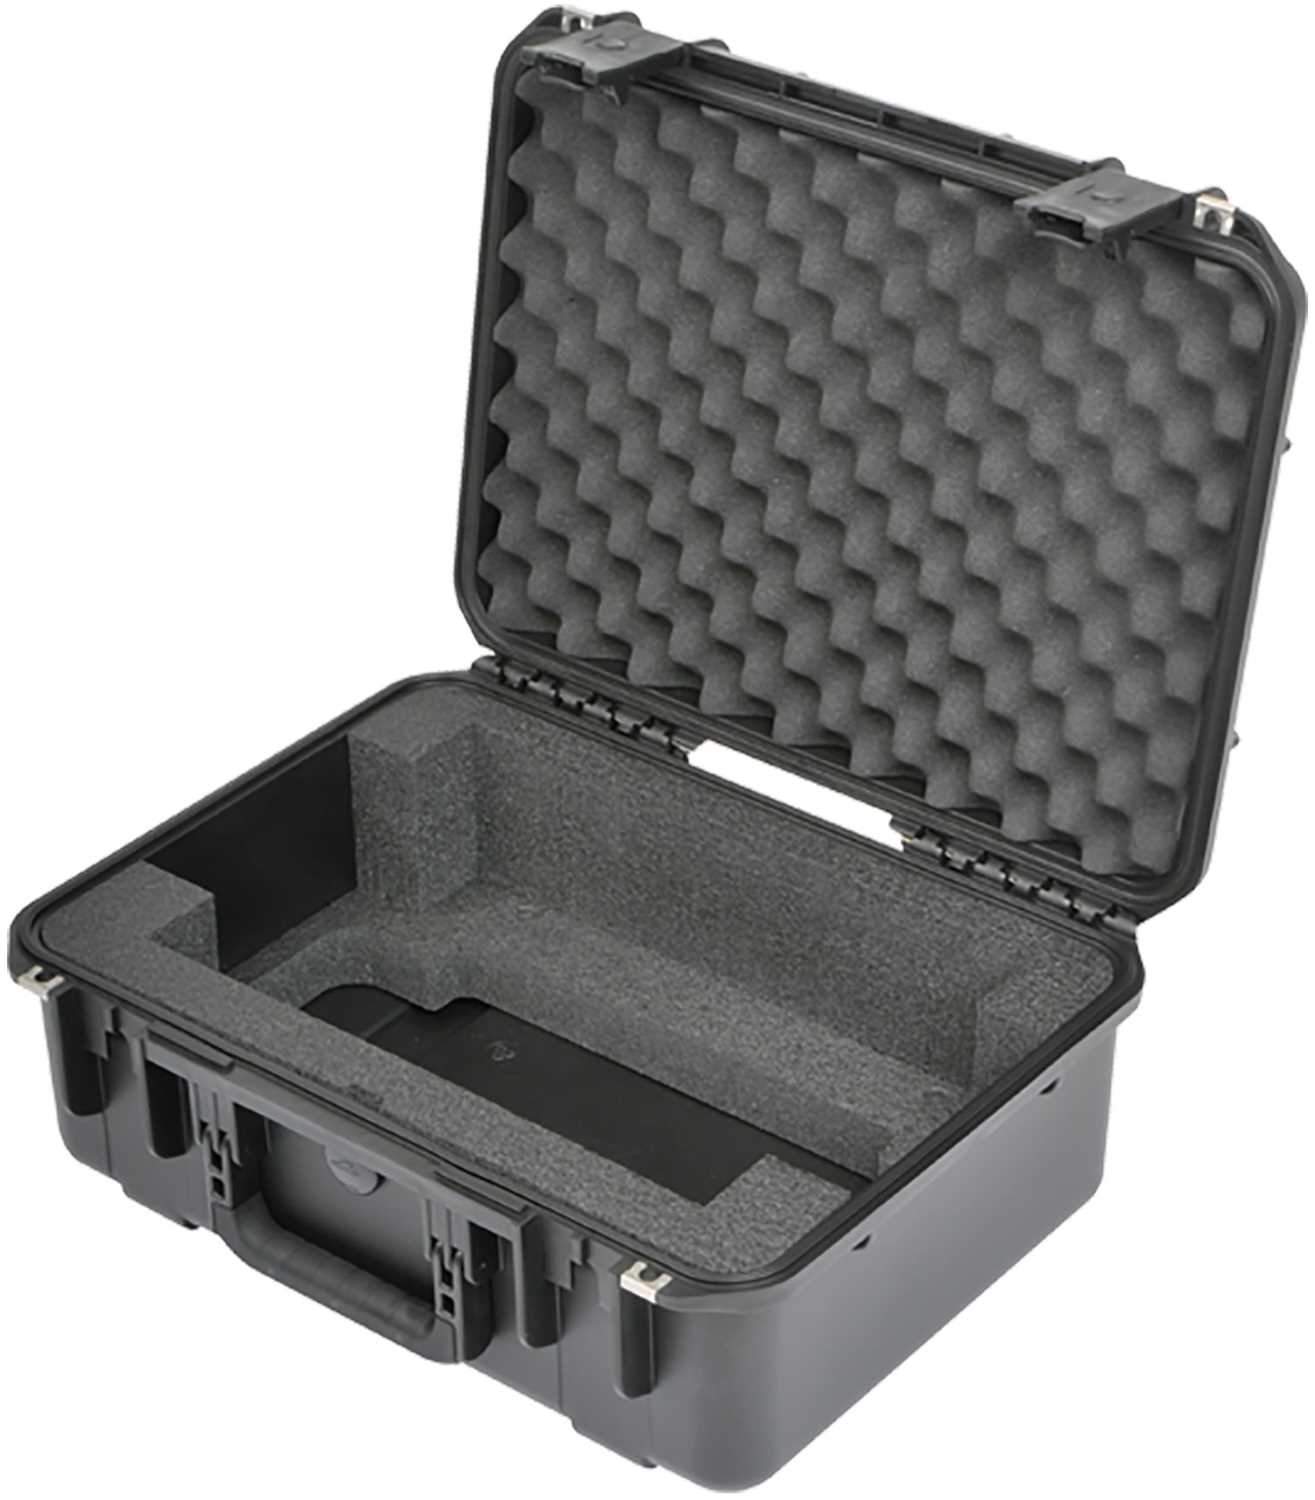 SKB 3i1813-7RNE iSeries Molded Case for Rane Mixer - ProSound and Stage Lighting